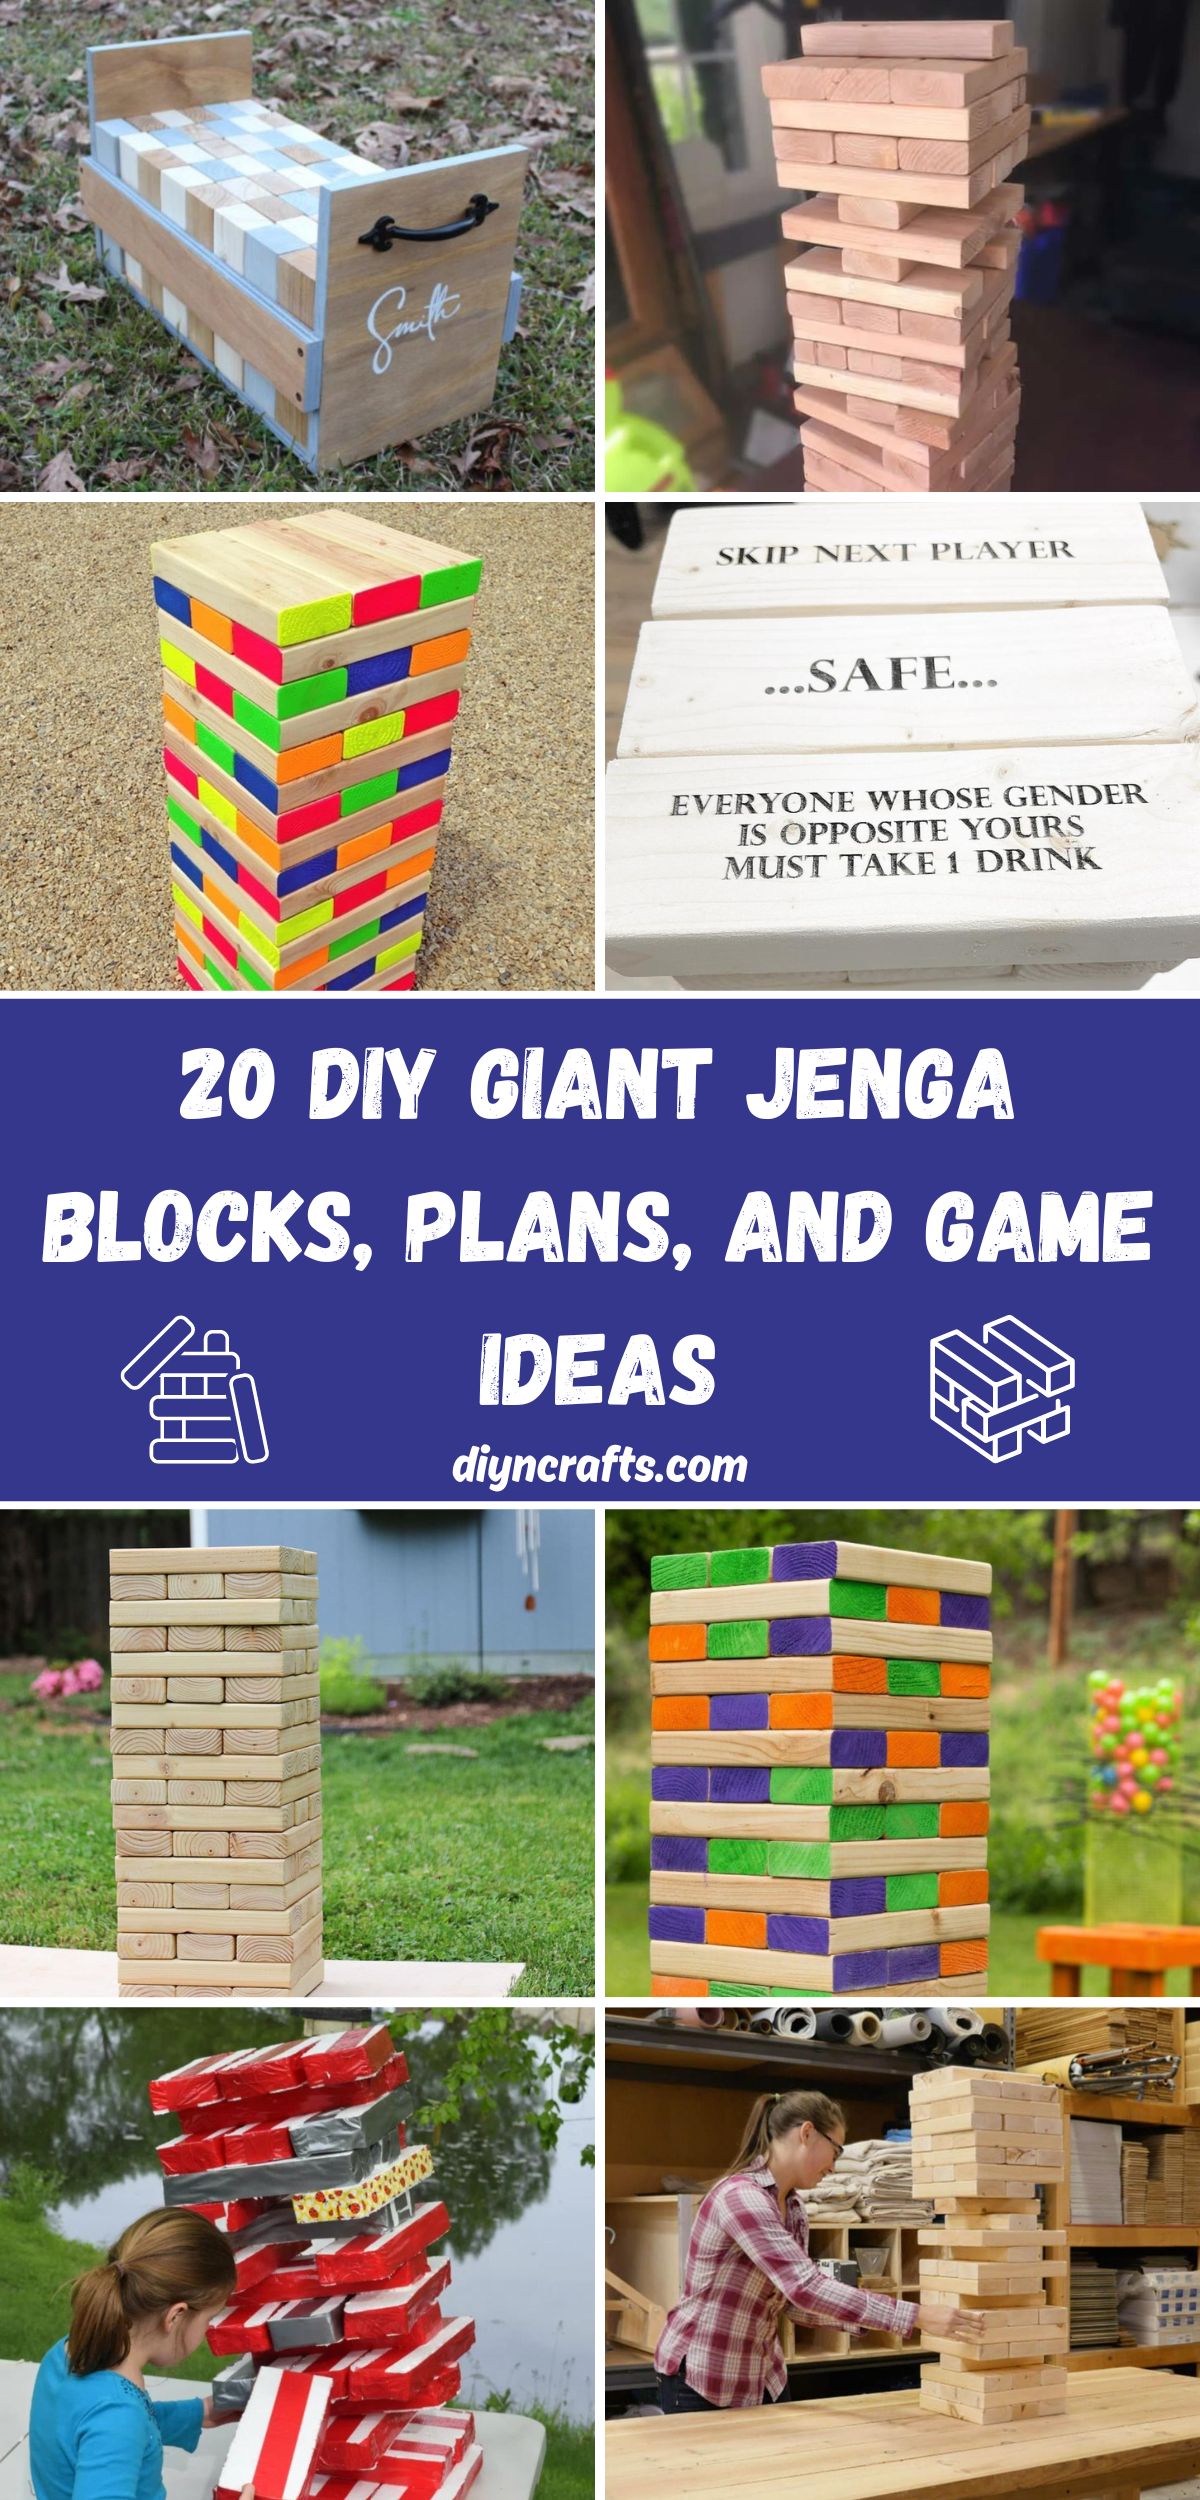 20 DIY Giant Jenga Blocks, Plans, and Game Ideas collage.